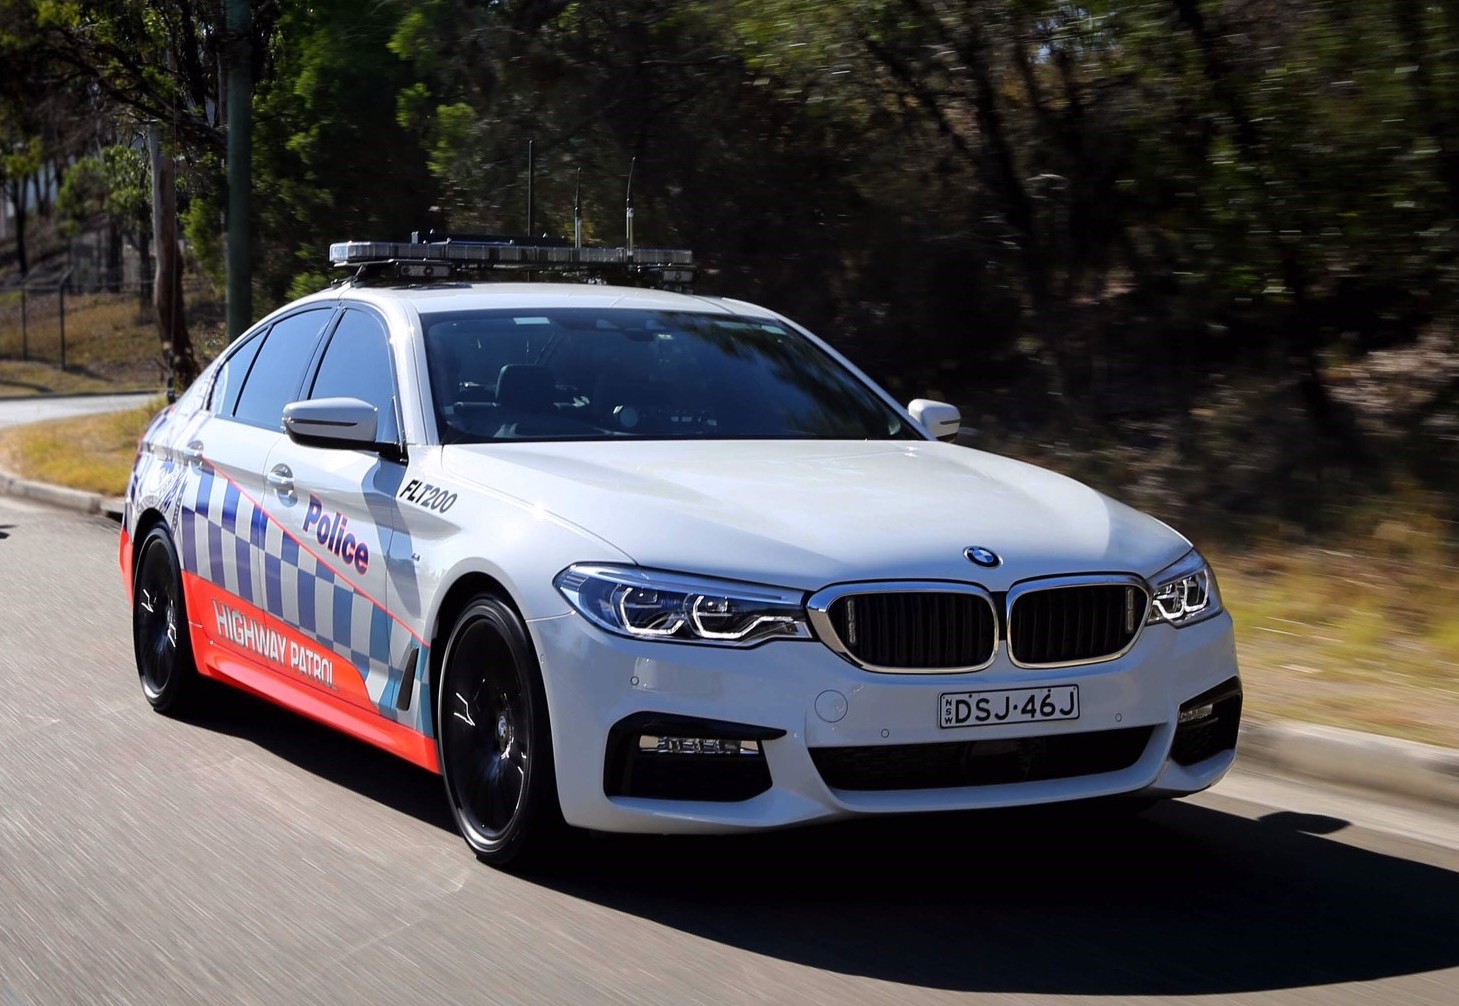 BMW 530d patrol cars confirmed for NSW Police Force